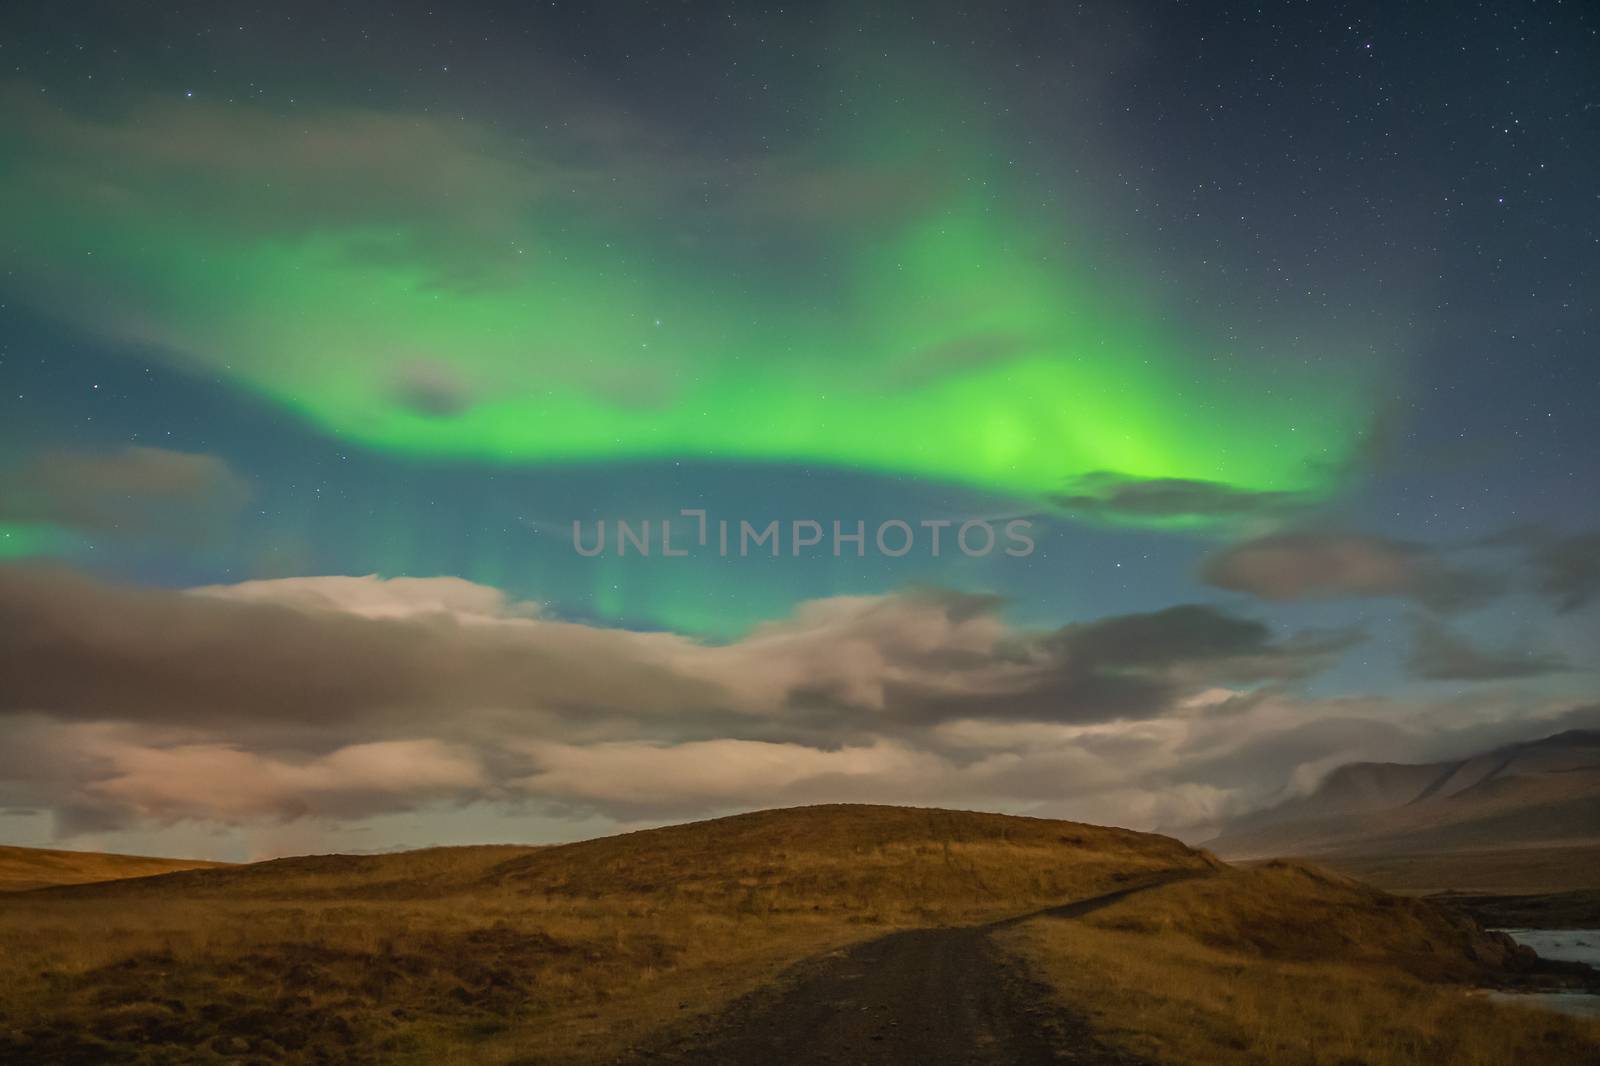 Aurora in Iceland northern lights bright beams rising in green beams over hiking path